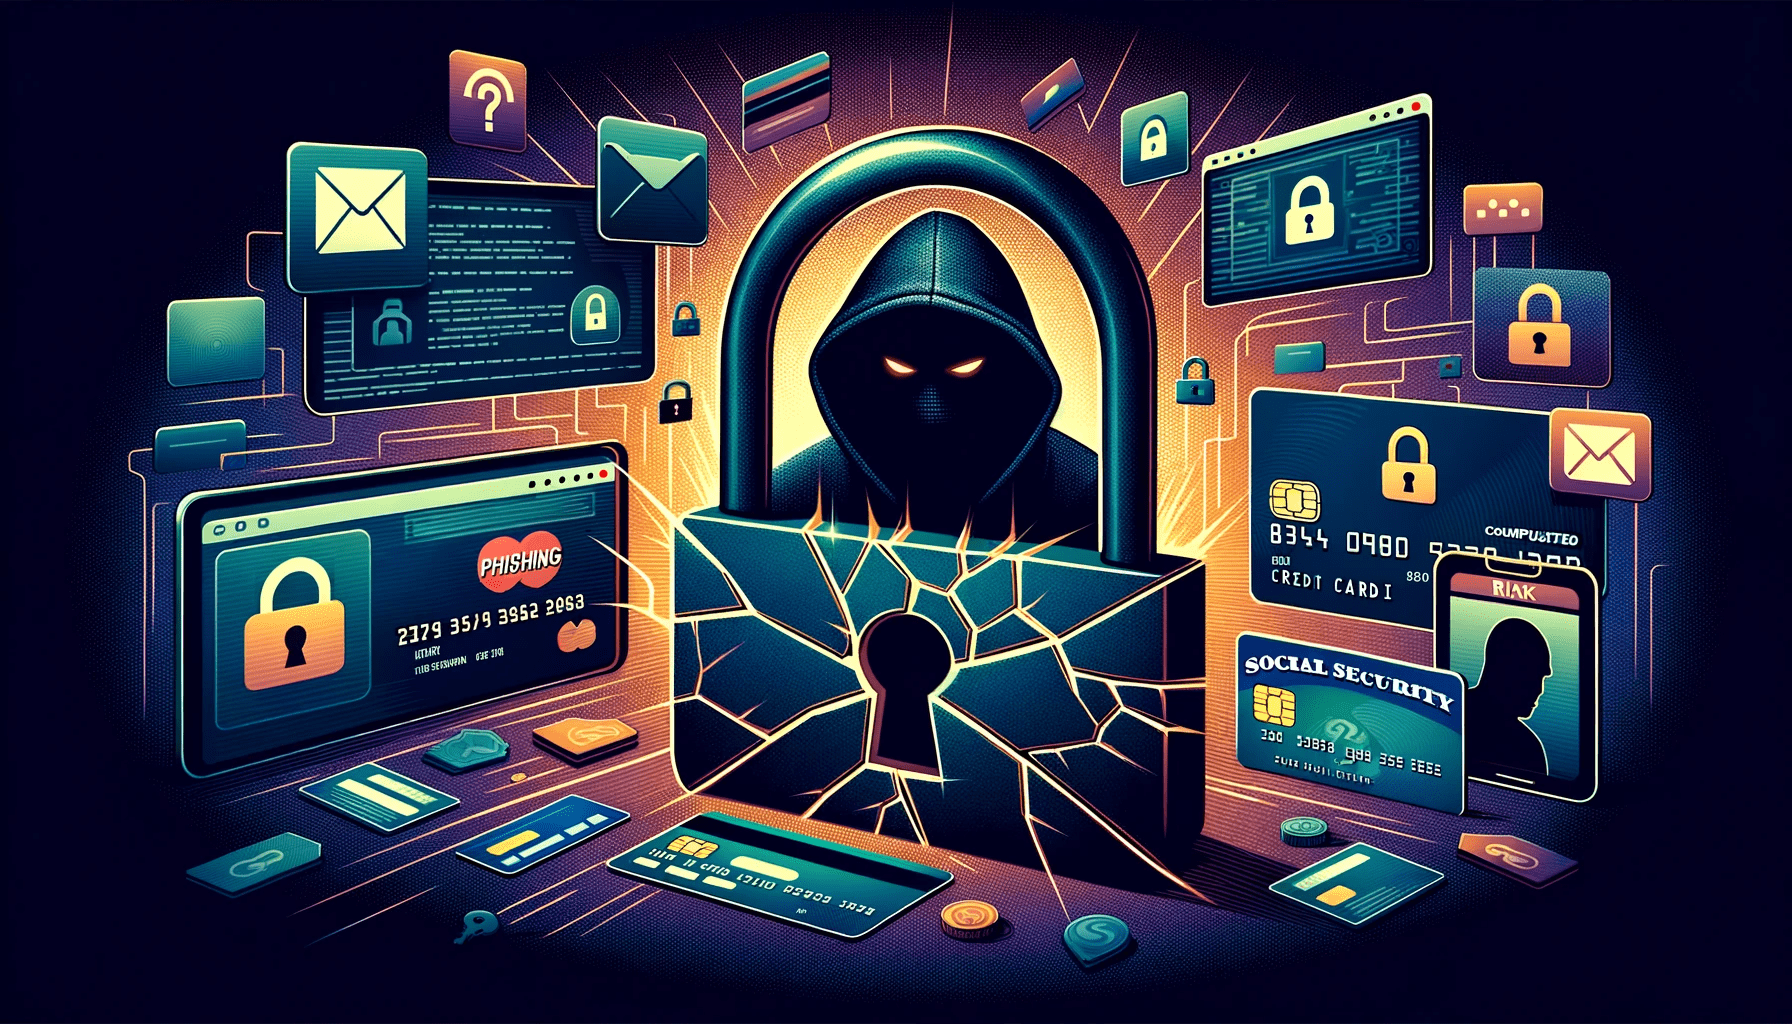 Illustration showcasing elements associated with online identity theft. 